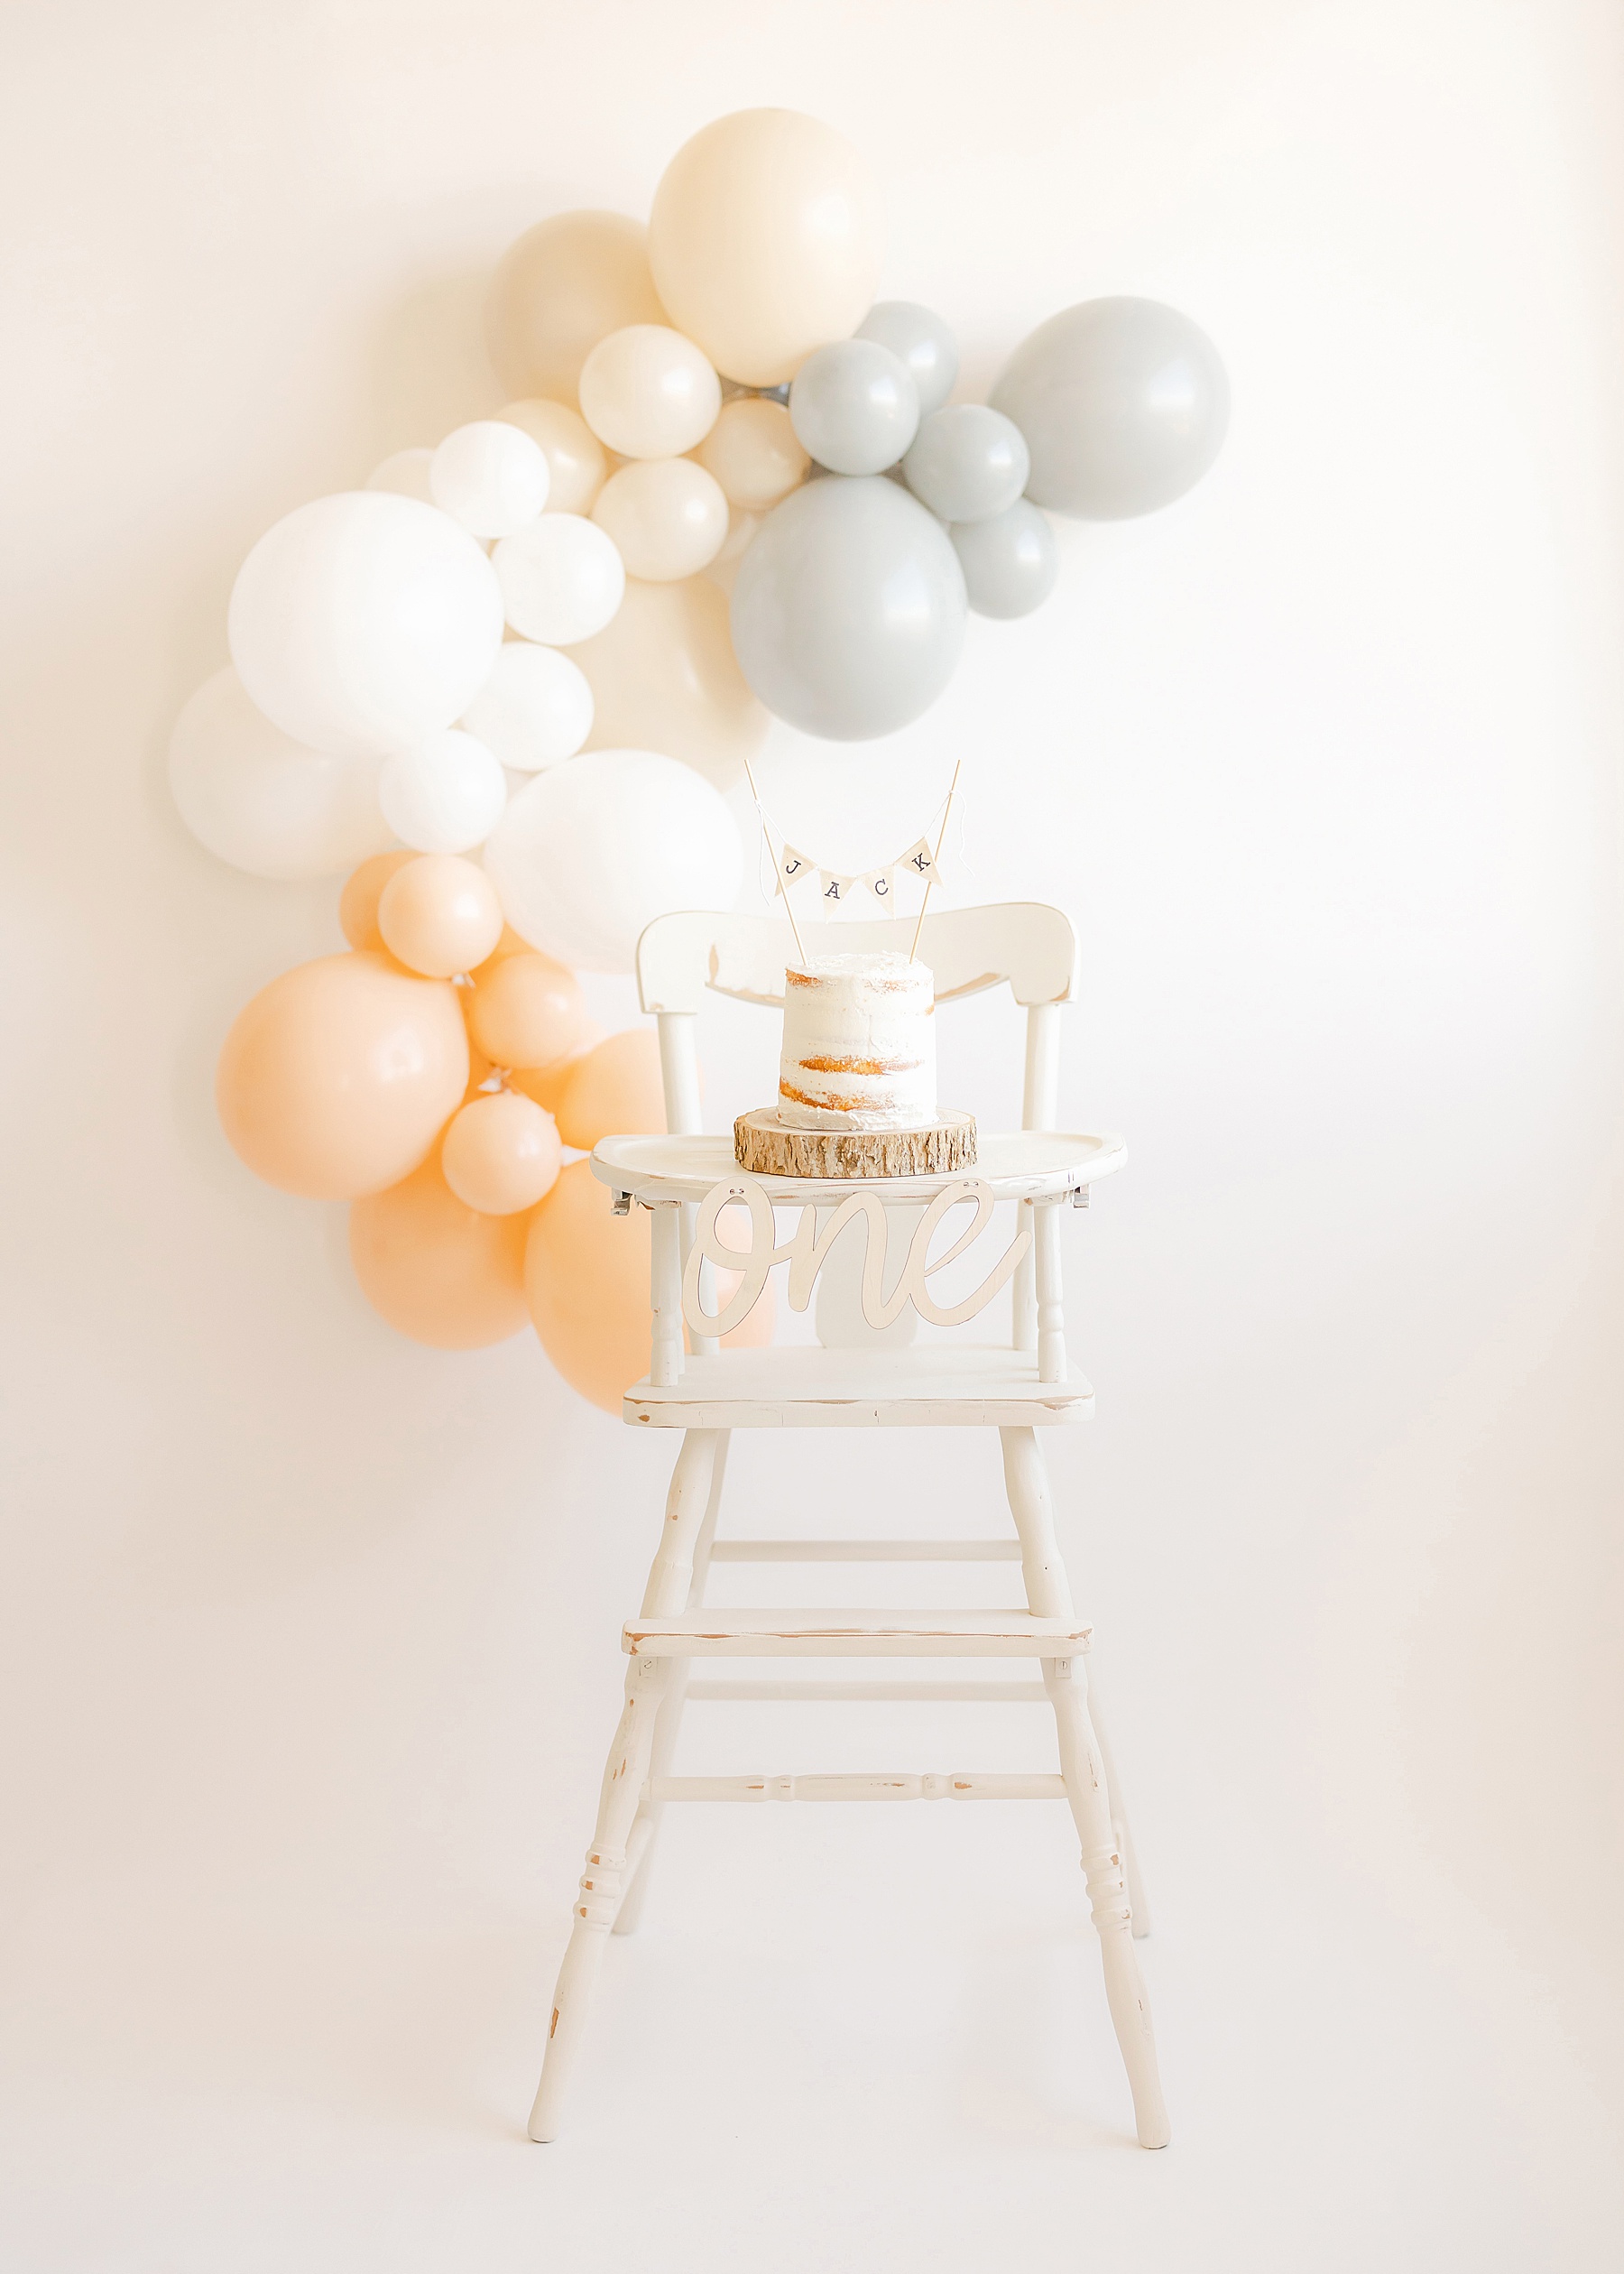 white high chair with balloons in background with small white cake in front